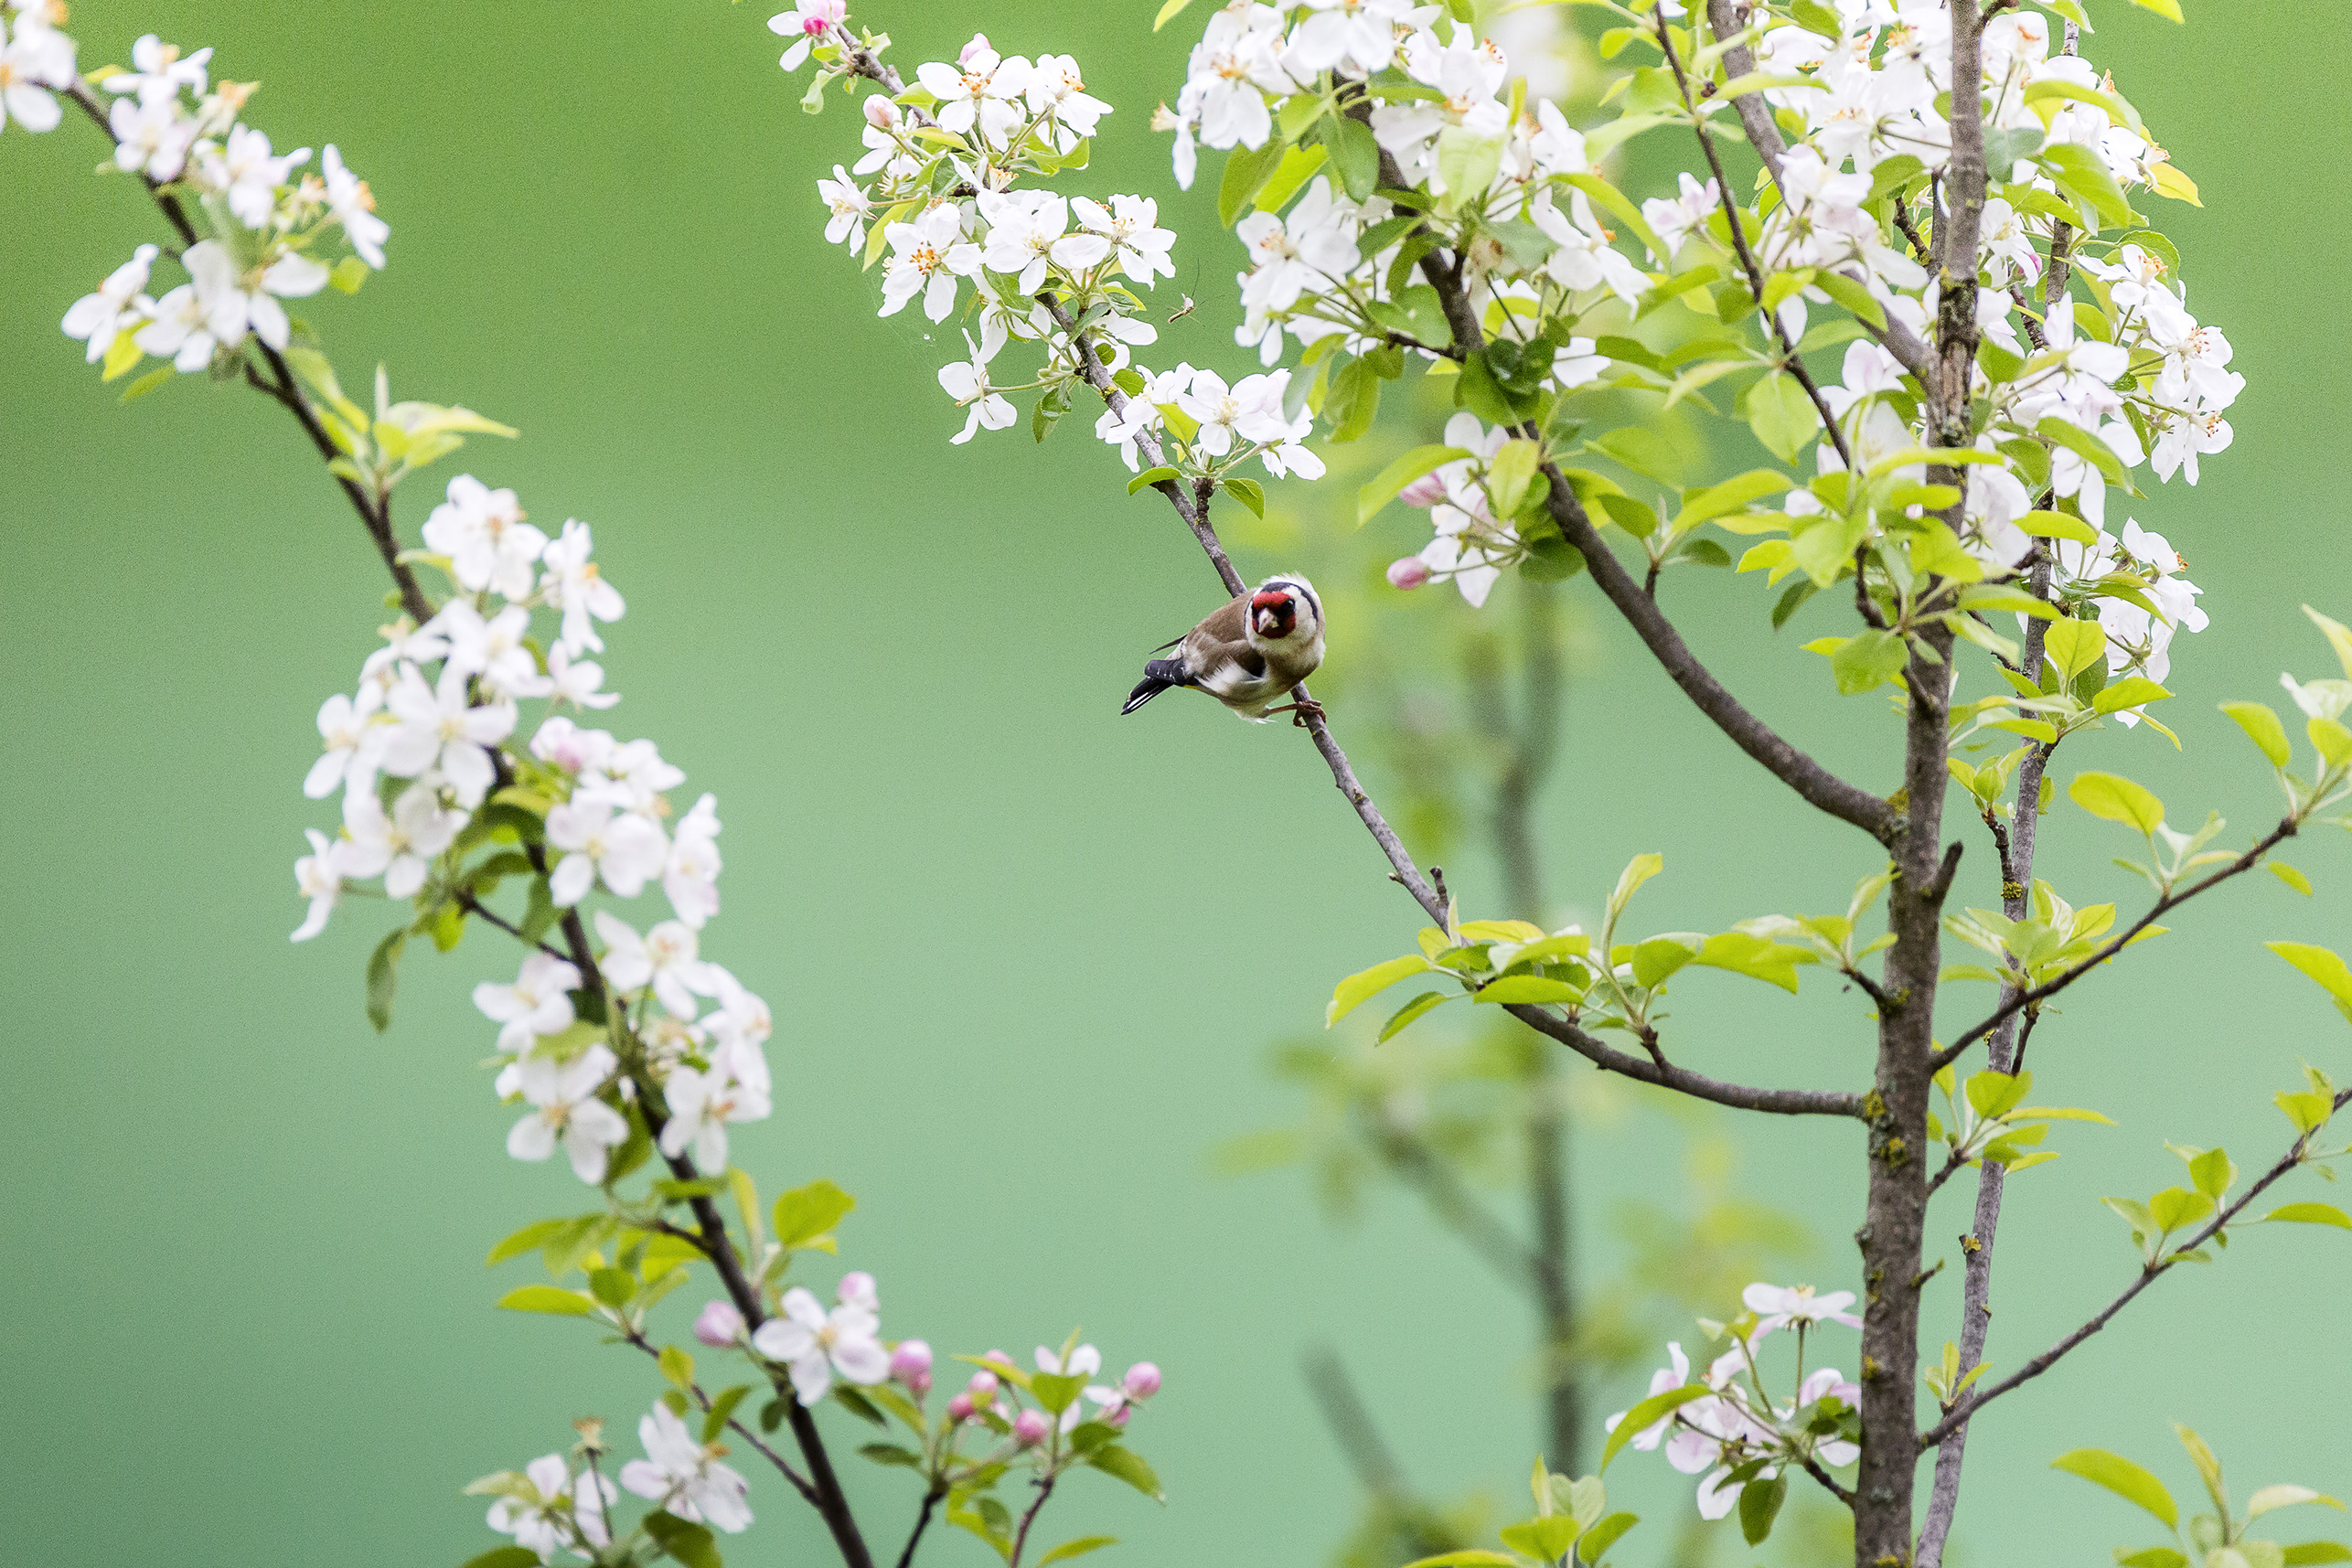 Flowers and blossom with a bird on a branch